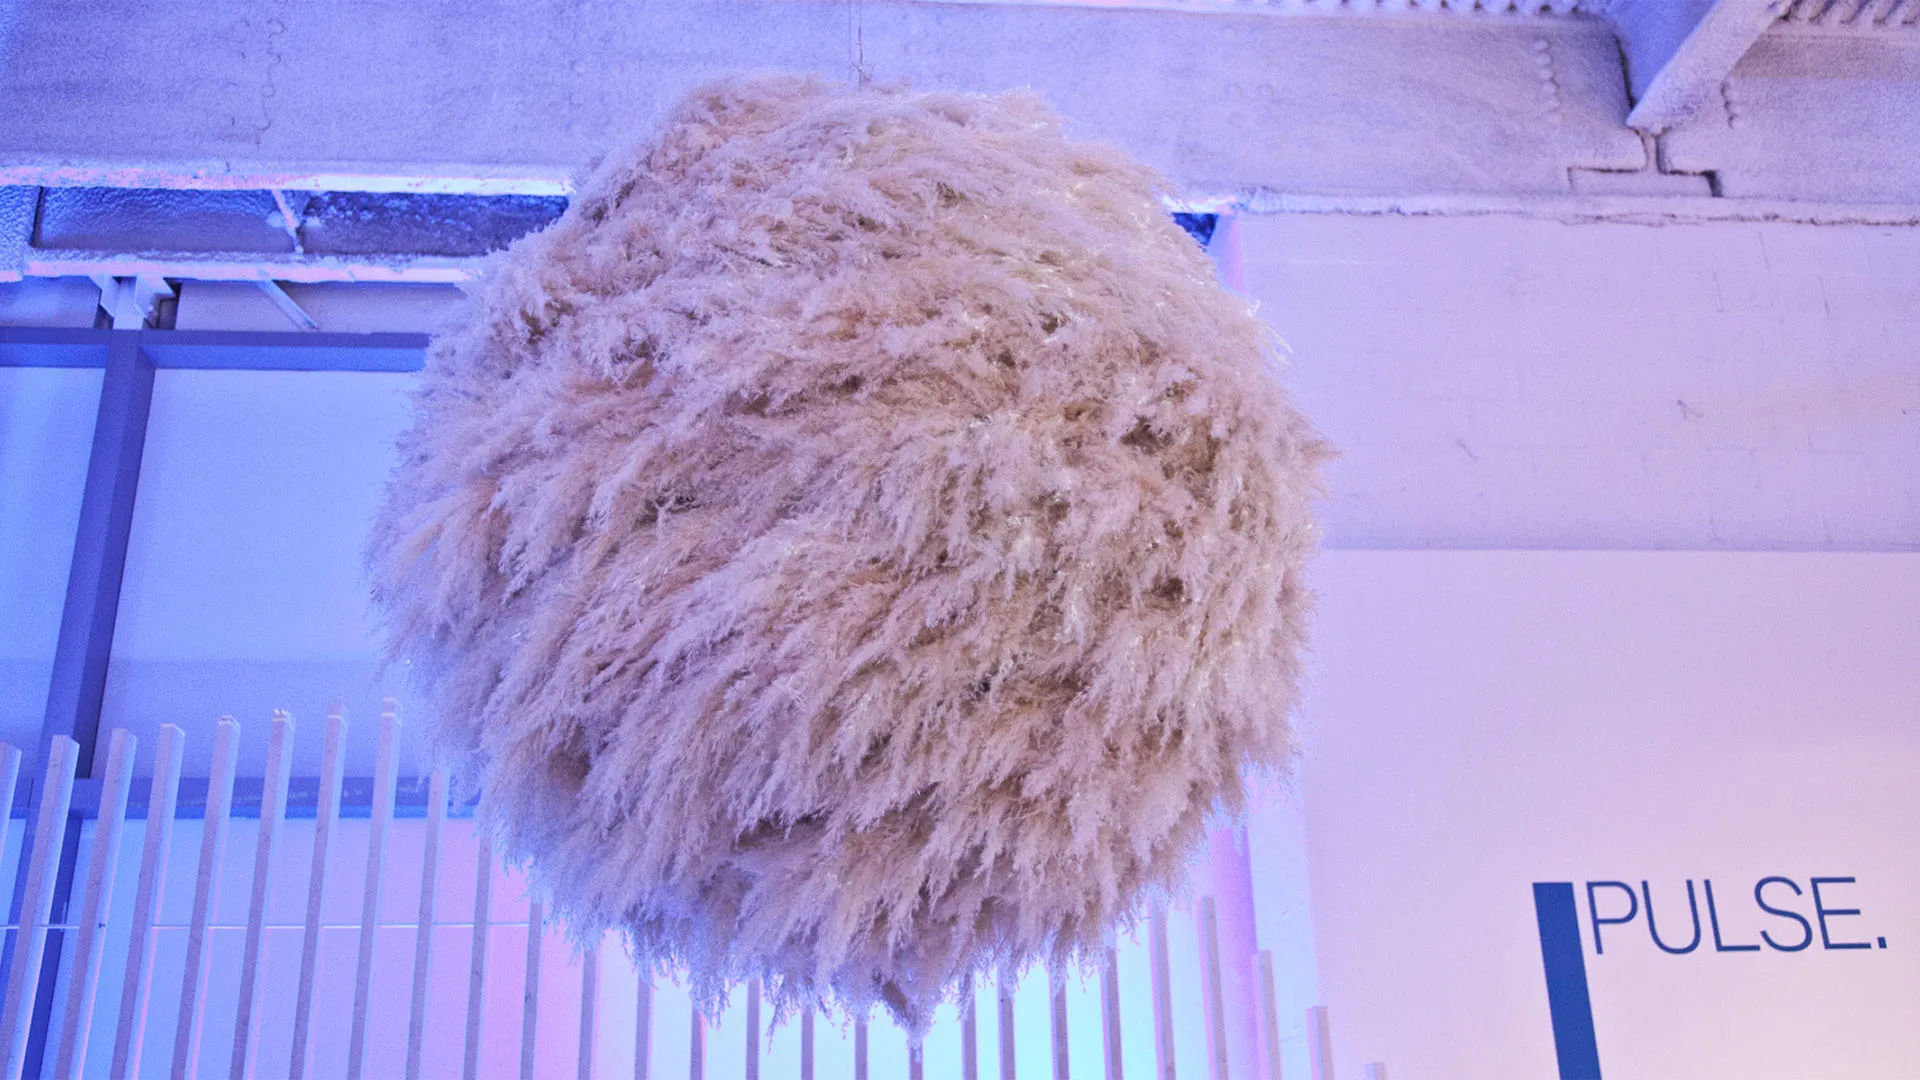 Pulse - the sculpture was created from plant fiber